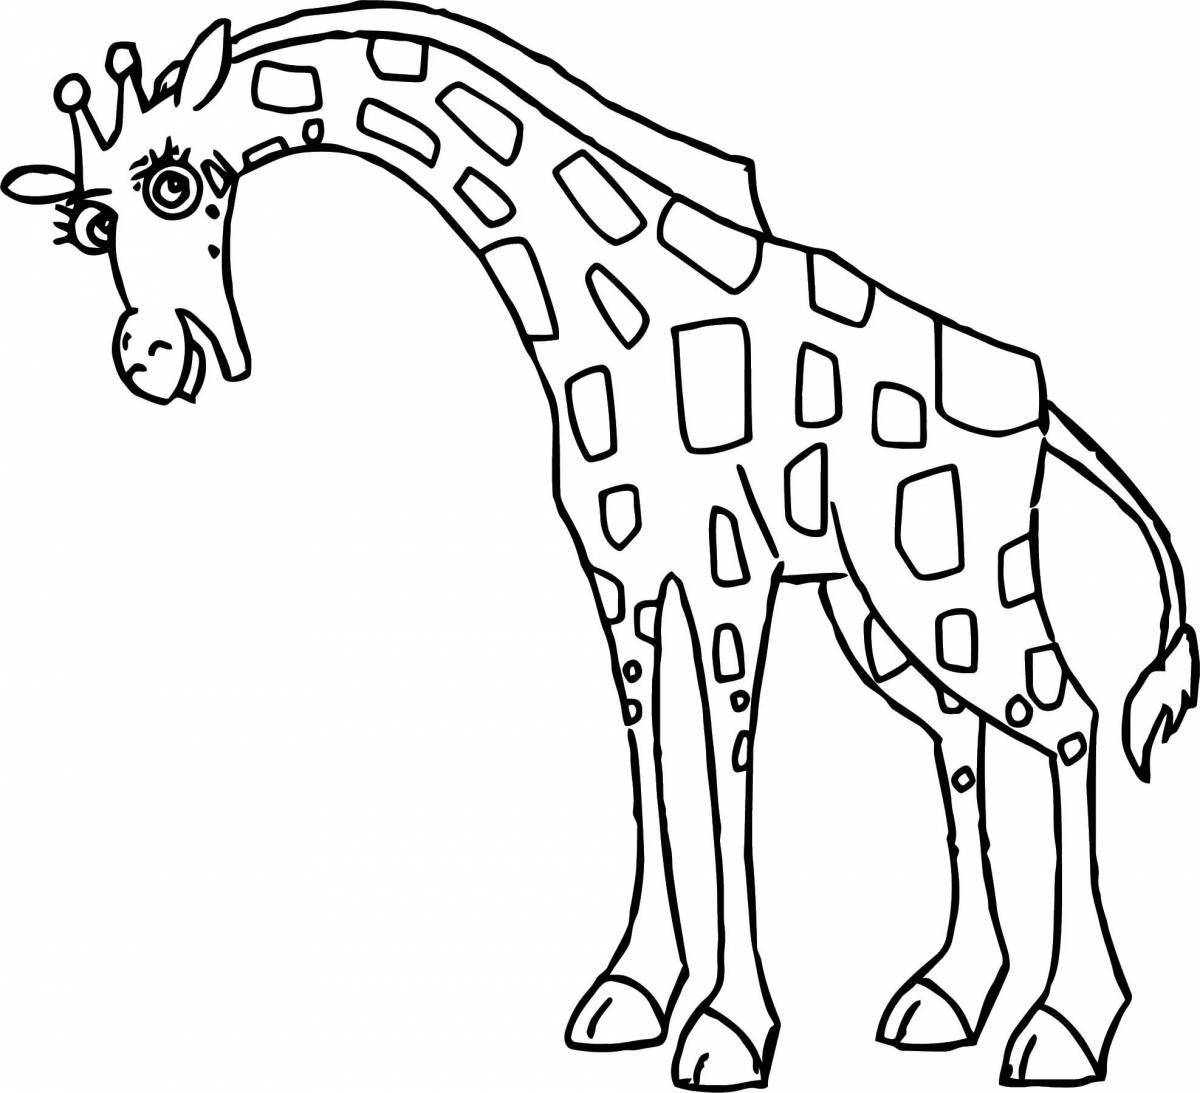 Coloring book funny giraffe for the little ones